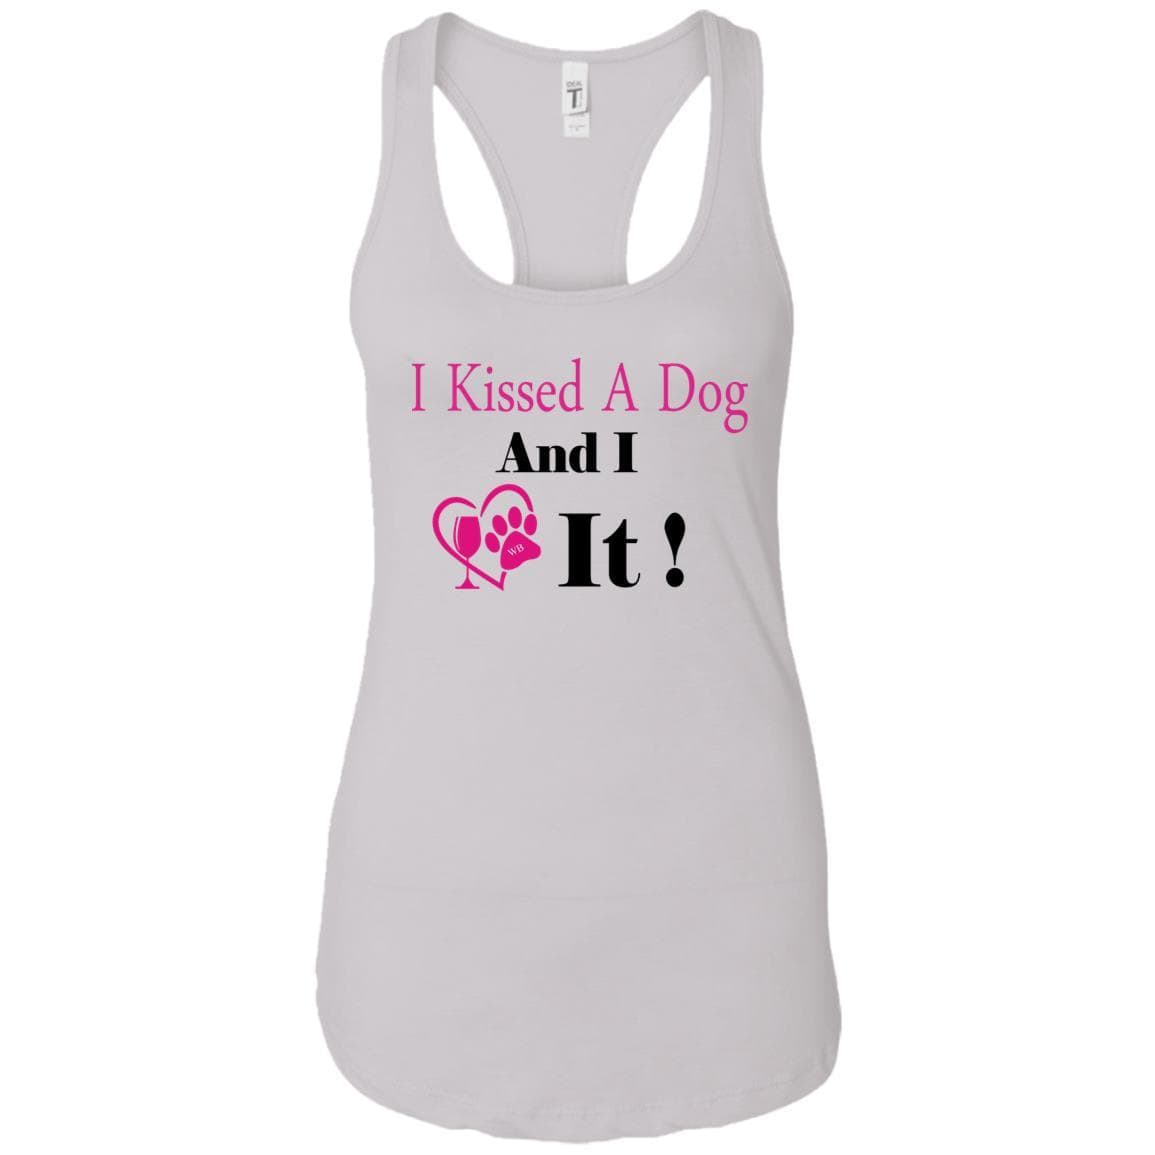 Tank Top White / X-Small WineyBitches.co "I Kissed A Dog And I Loved It:" Ladies Ideal Racerback Tank WineyBitchesCo